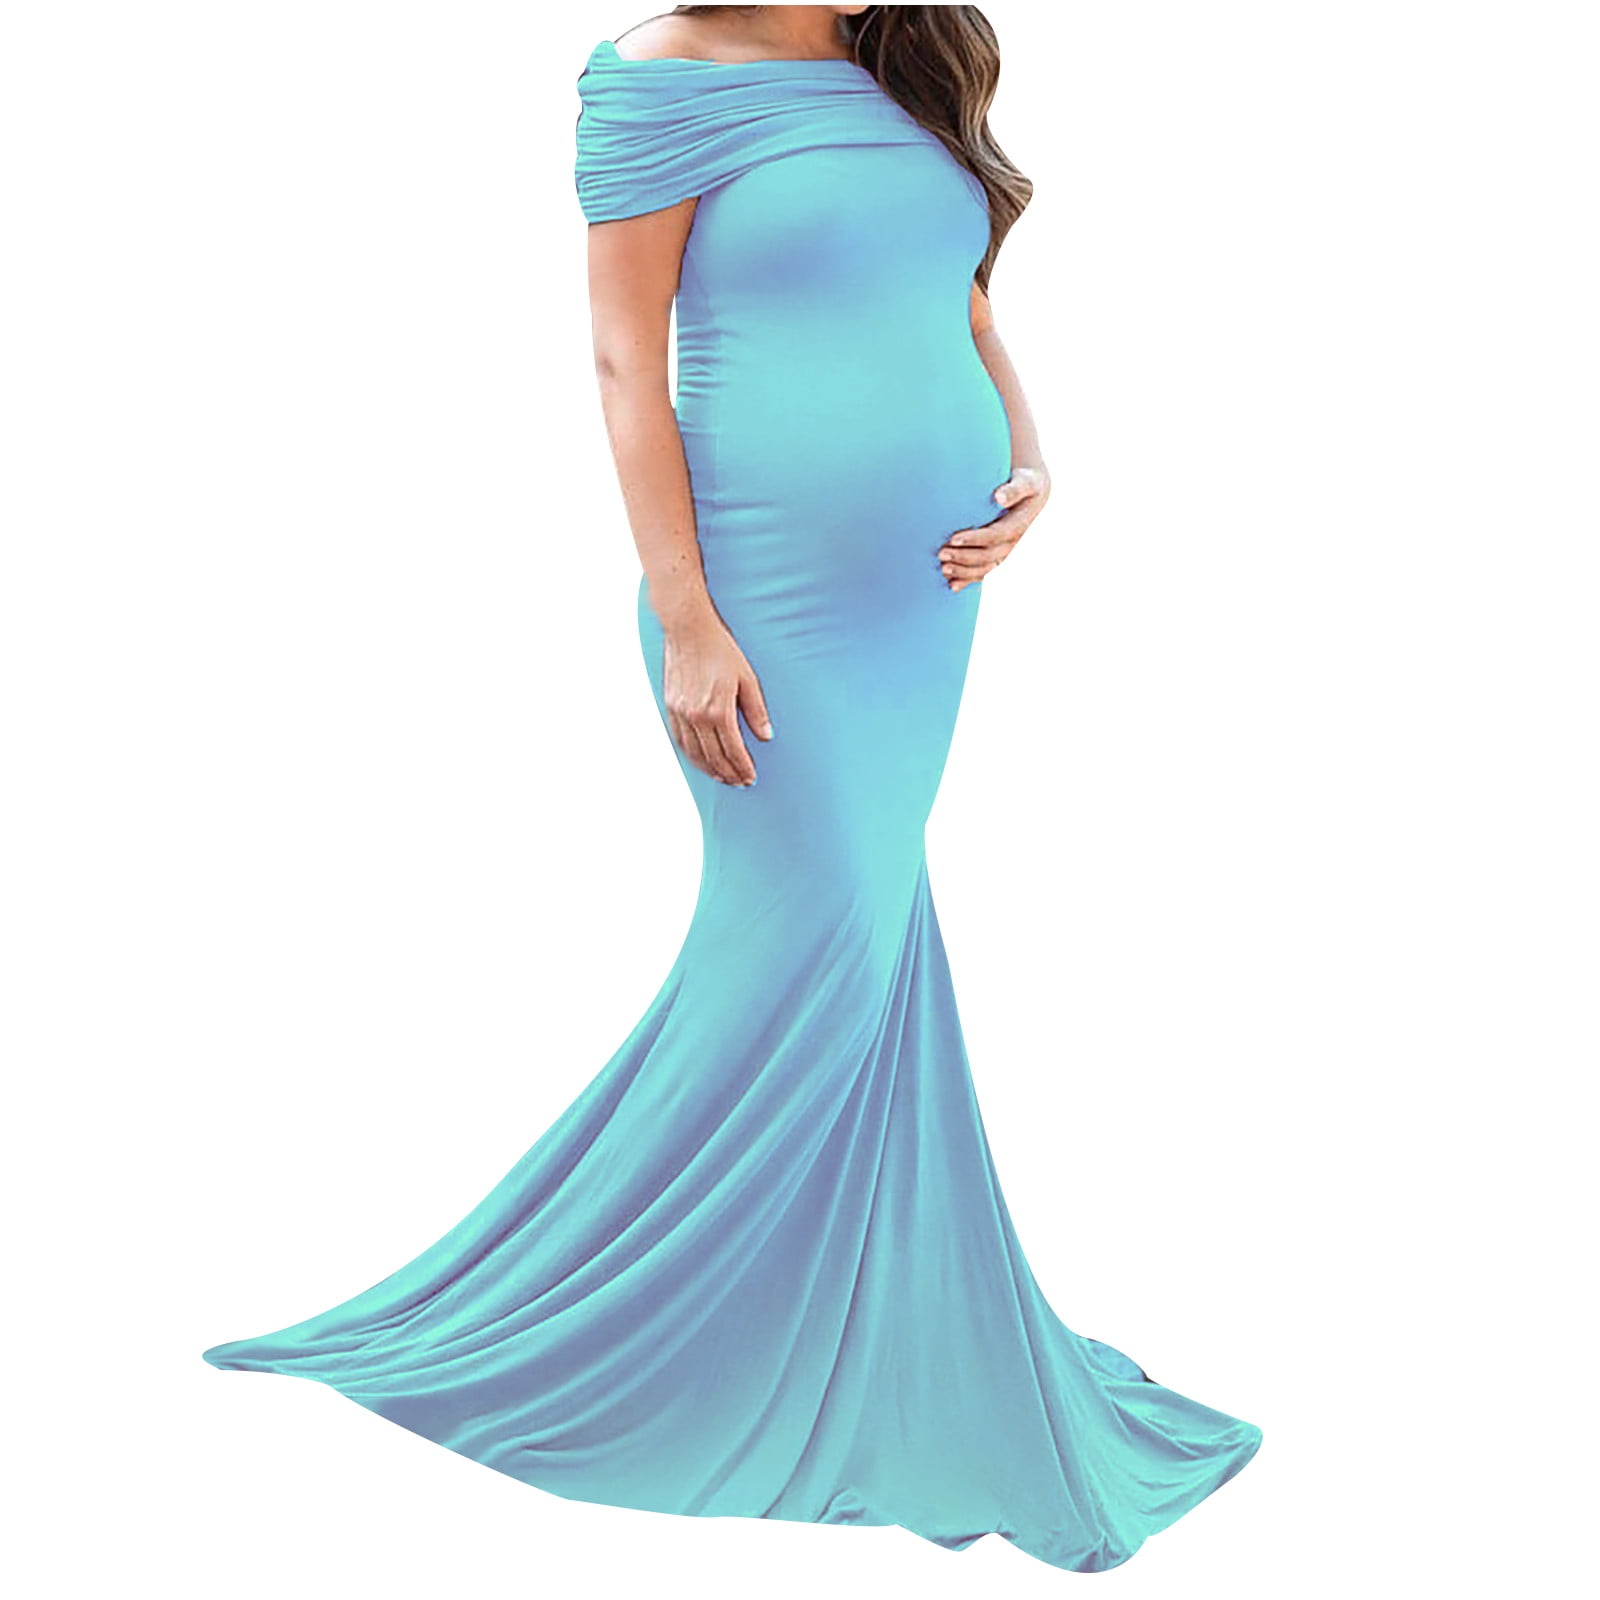 Taqqpue Womens Off Shoulder Maternity Dress Photoshot Baby Shower Wedding Guest Slim Fit Gown Flowy Ruffle Stretchy Long Maxi Photography Pregnancy D 551c708a 57ac 40c5 874c fab34a19e08e.c3f2db1d2e56f7448b8f6edfc31fb0f9